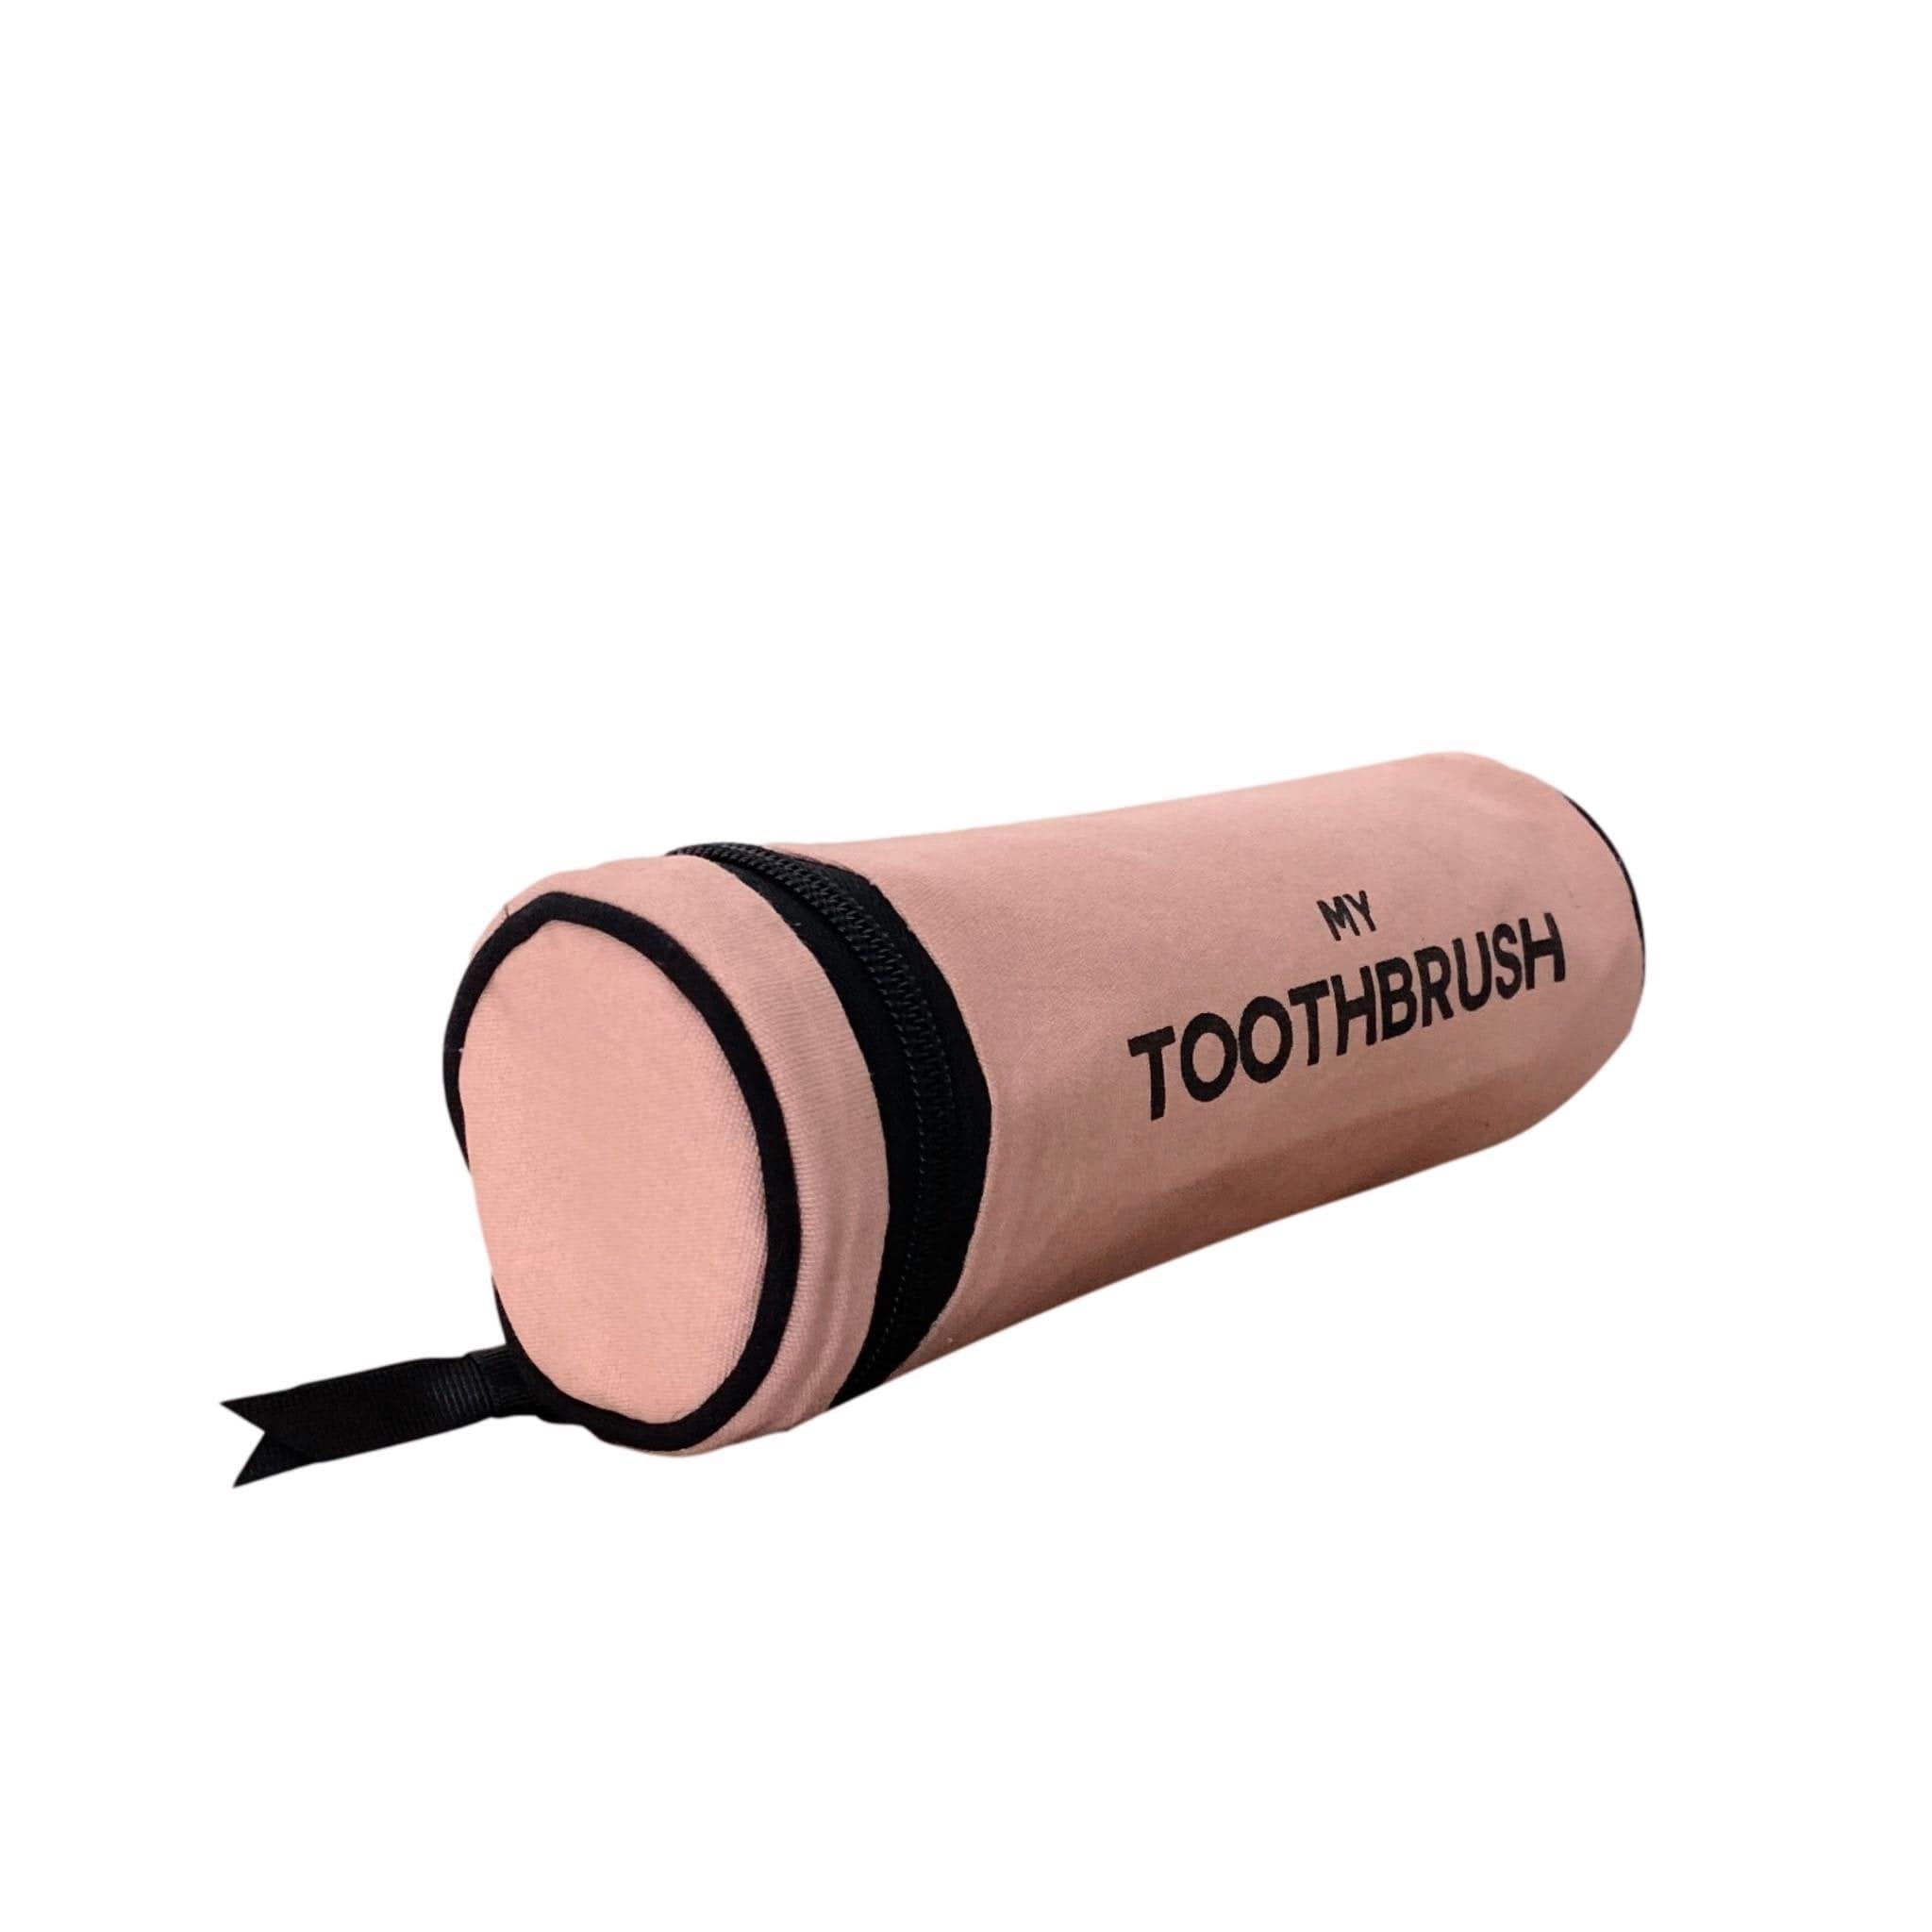 Toothbrush case for travel in pink. 